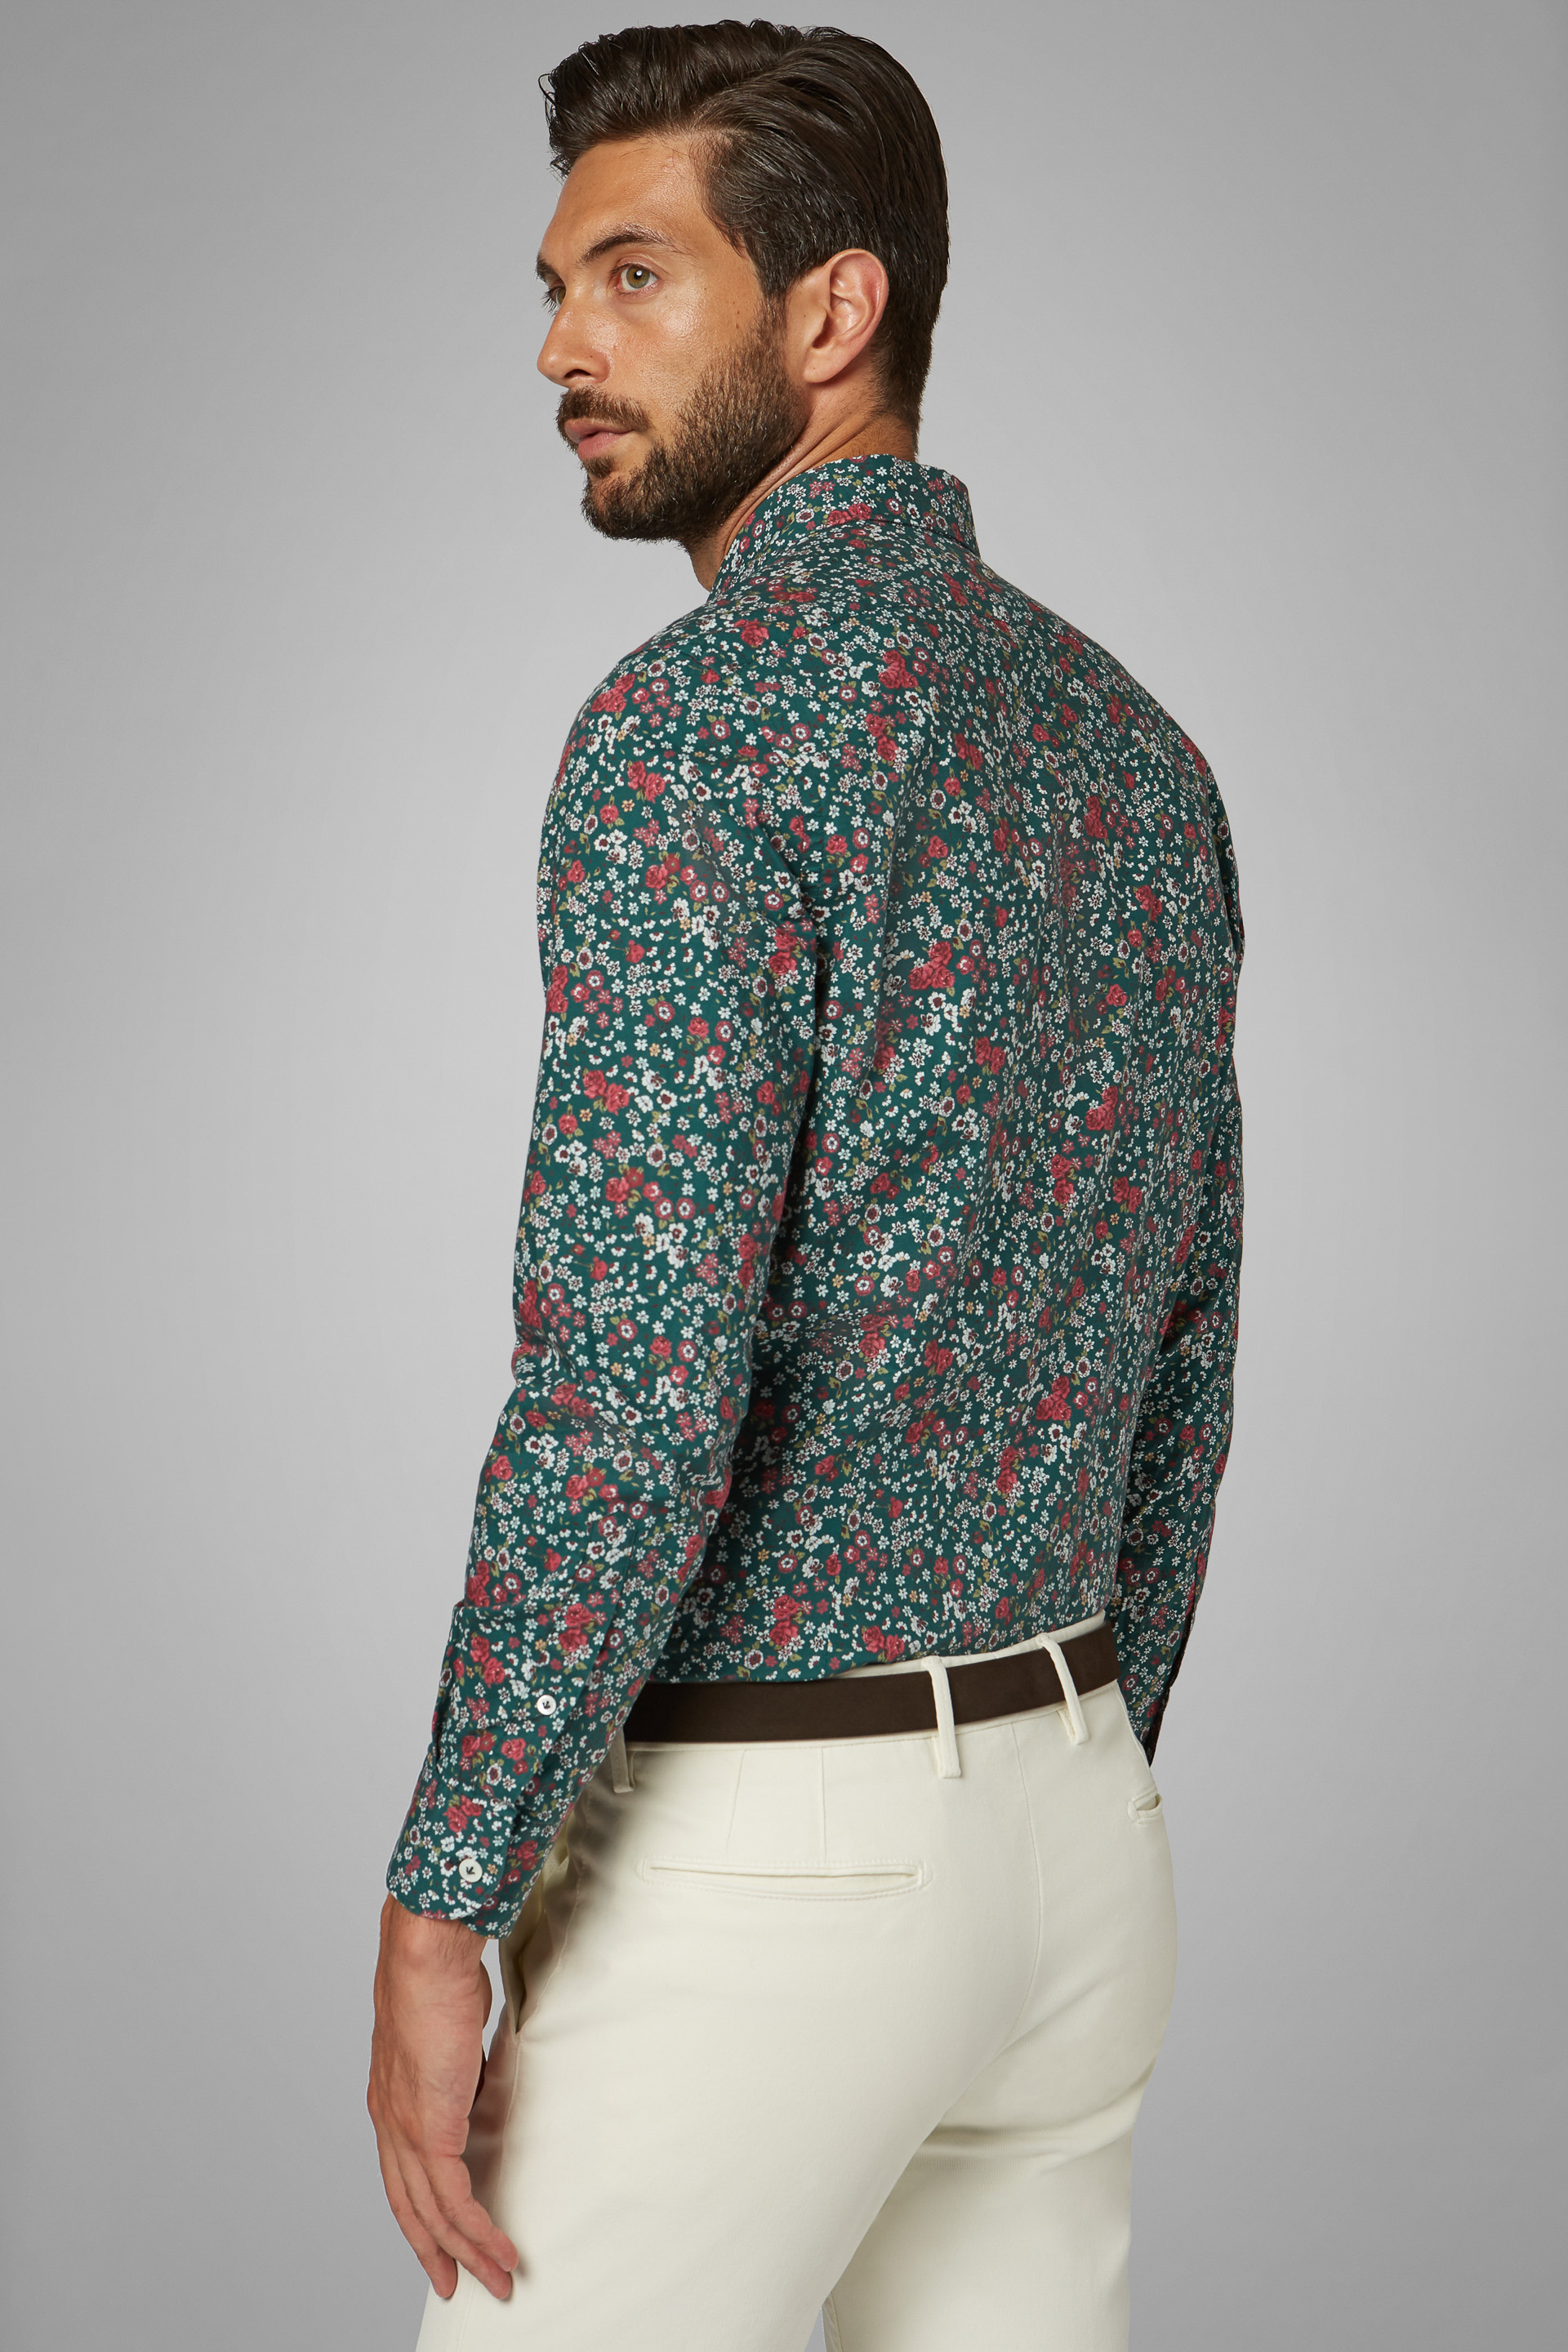 Men's Slim Fit Dark Green Floral Print Shirt With Florence Collar